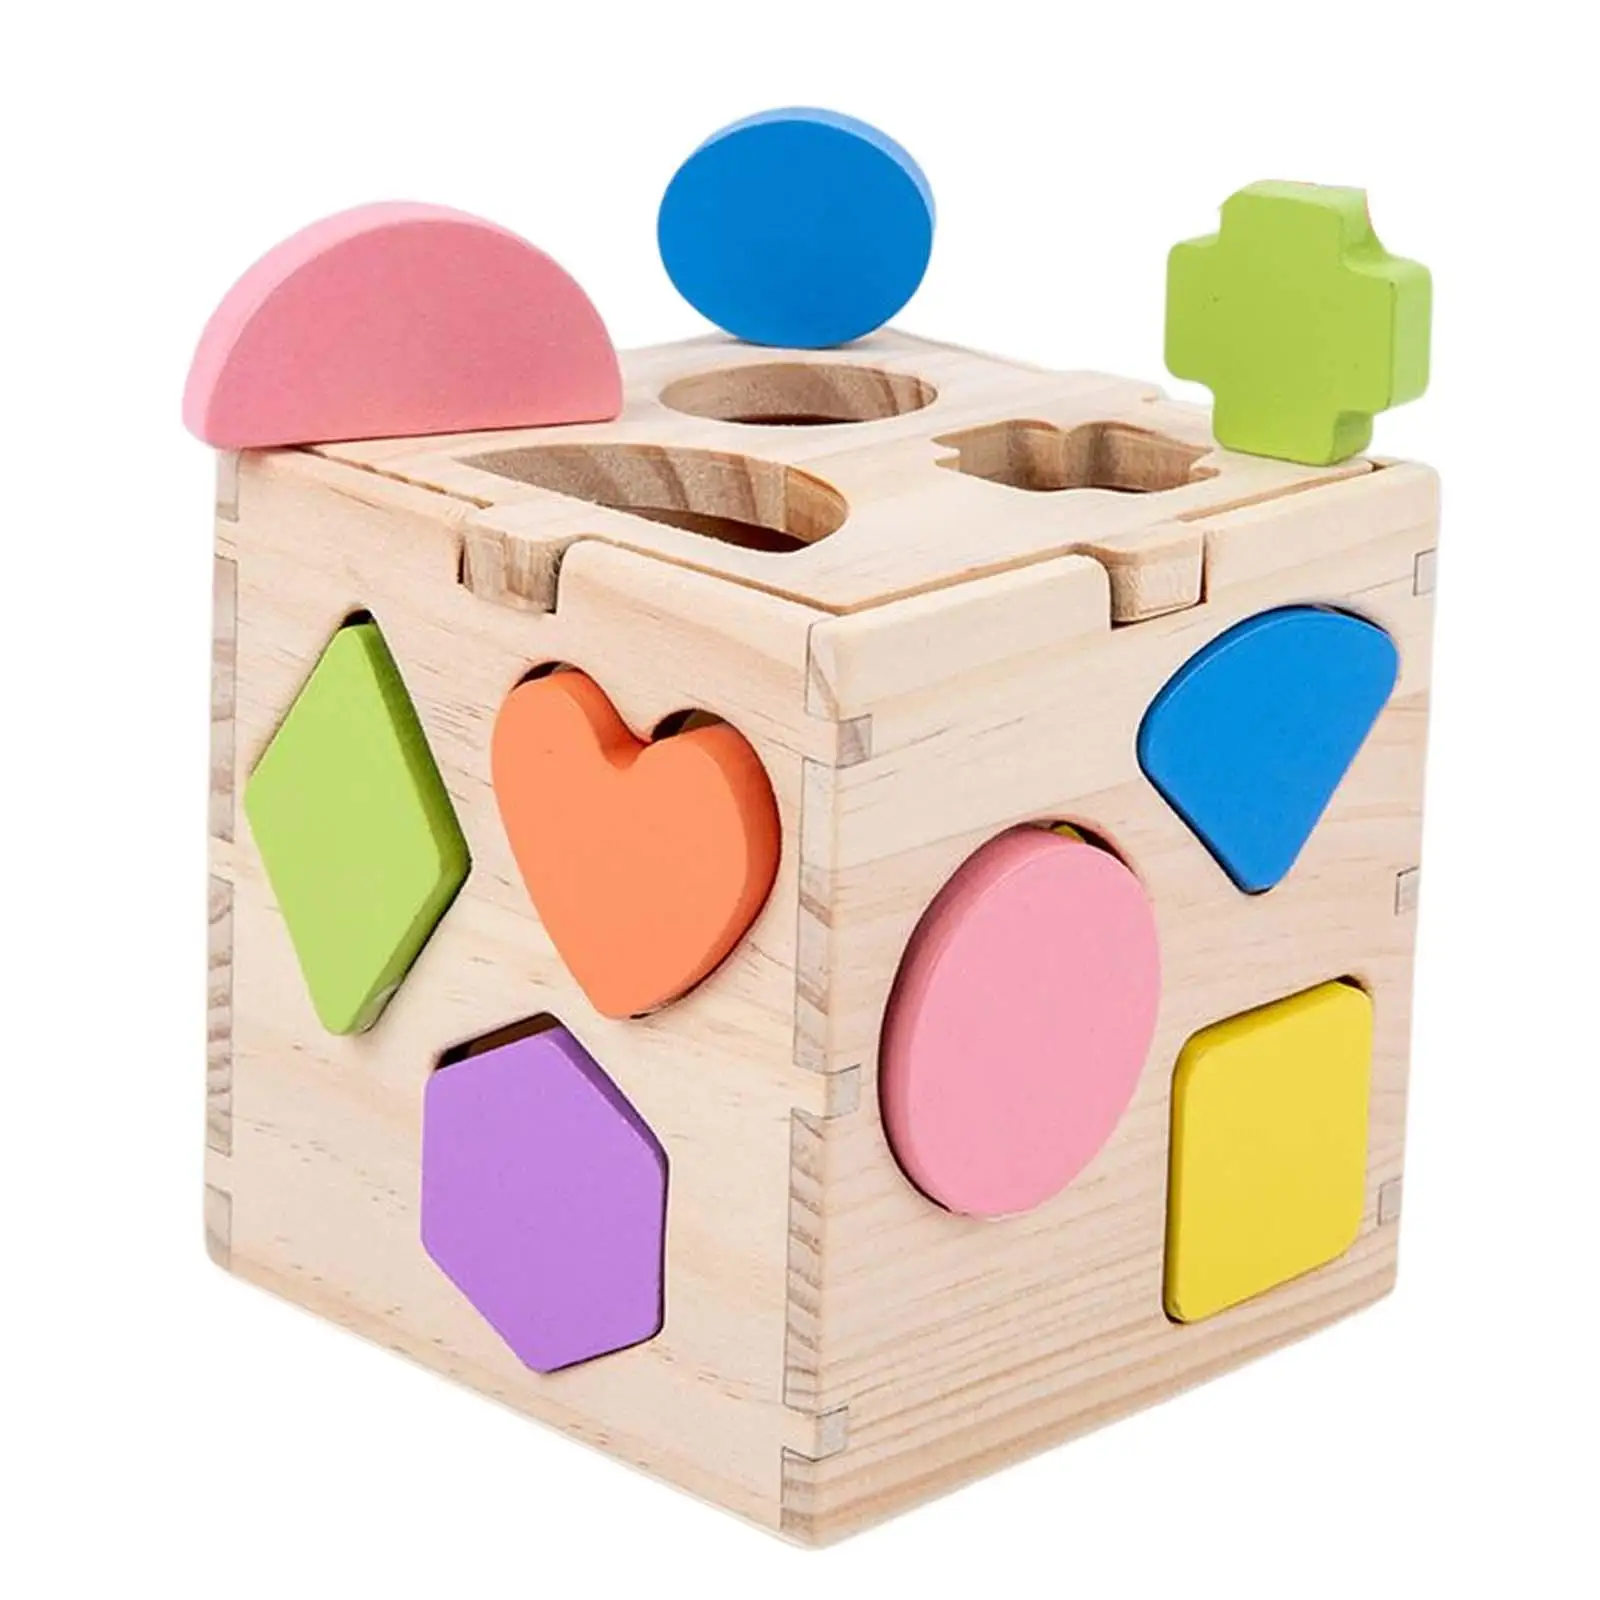 Wooden Geometric Shape Toy Educational Learning Toy Developmental Toy Develop Fine Motor Skill for Girls Children Holiday Gifts